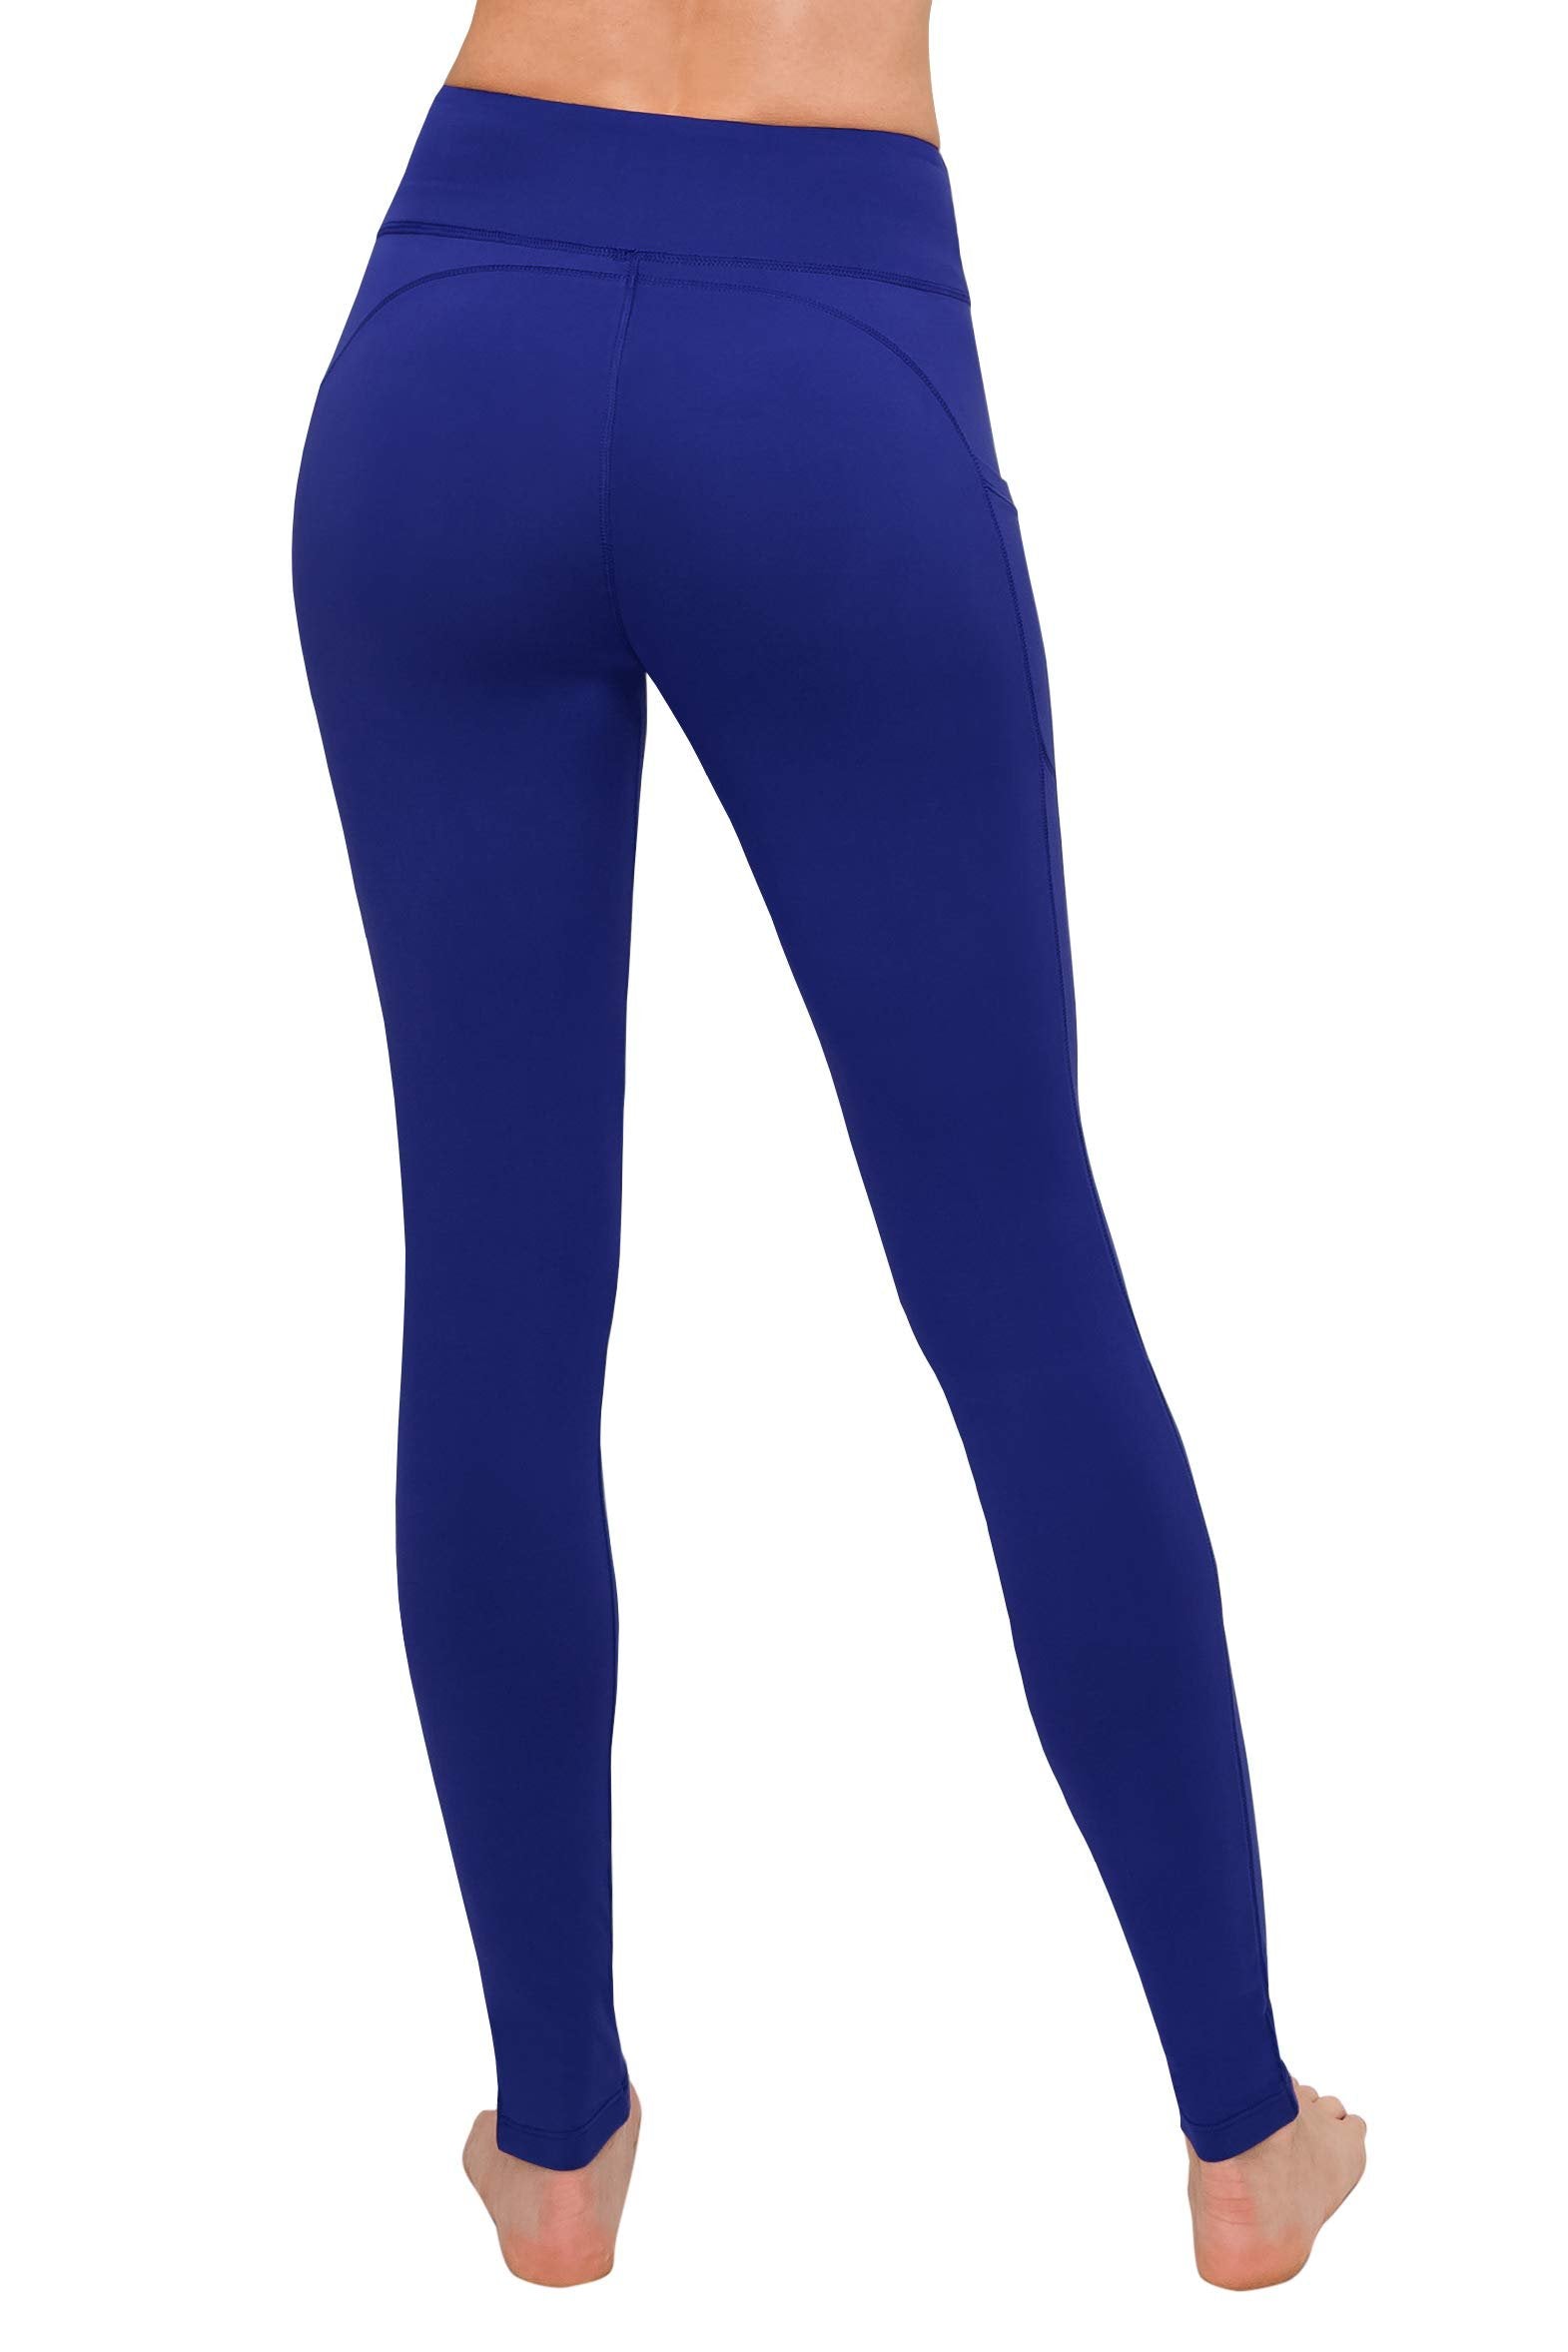 SATINA High Waisted Leggings with Pockets for Women - Leggings for Regular & Plus Size Women - Royal Blue Leggings Women - Leggings for Women |3 Inch Waistband (One Size, Royal Blue)